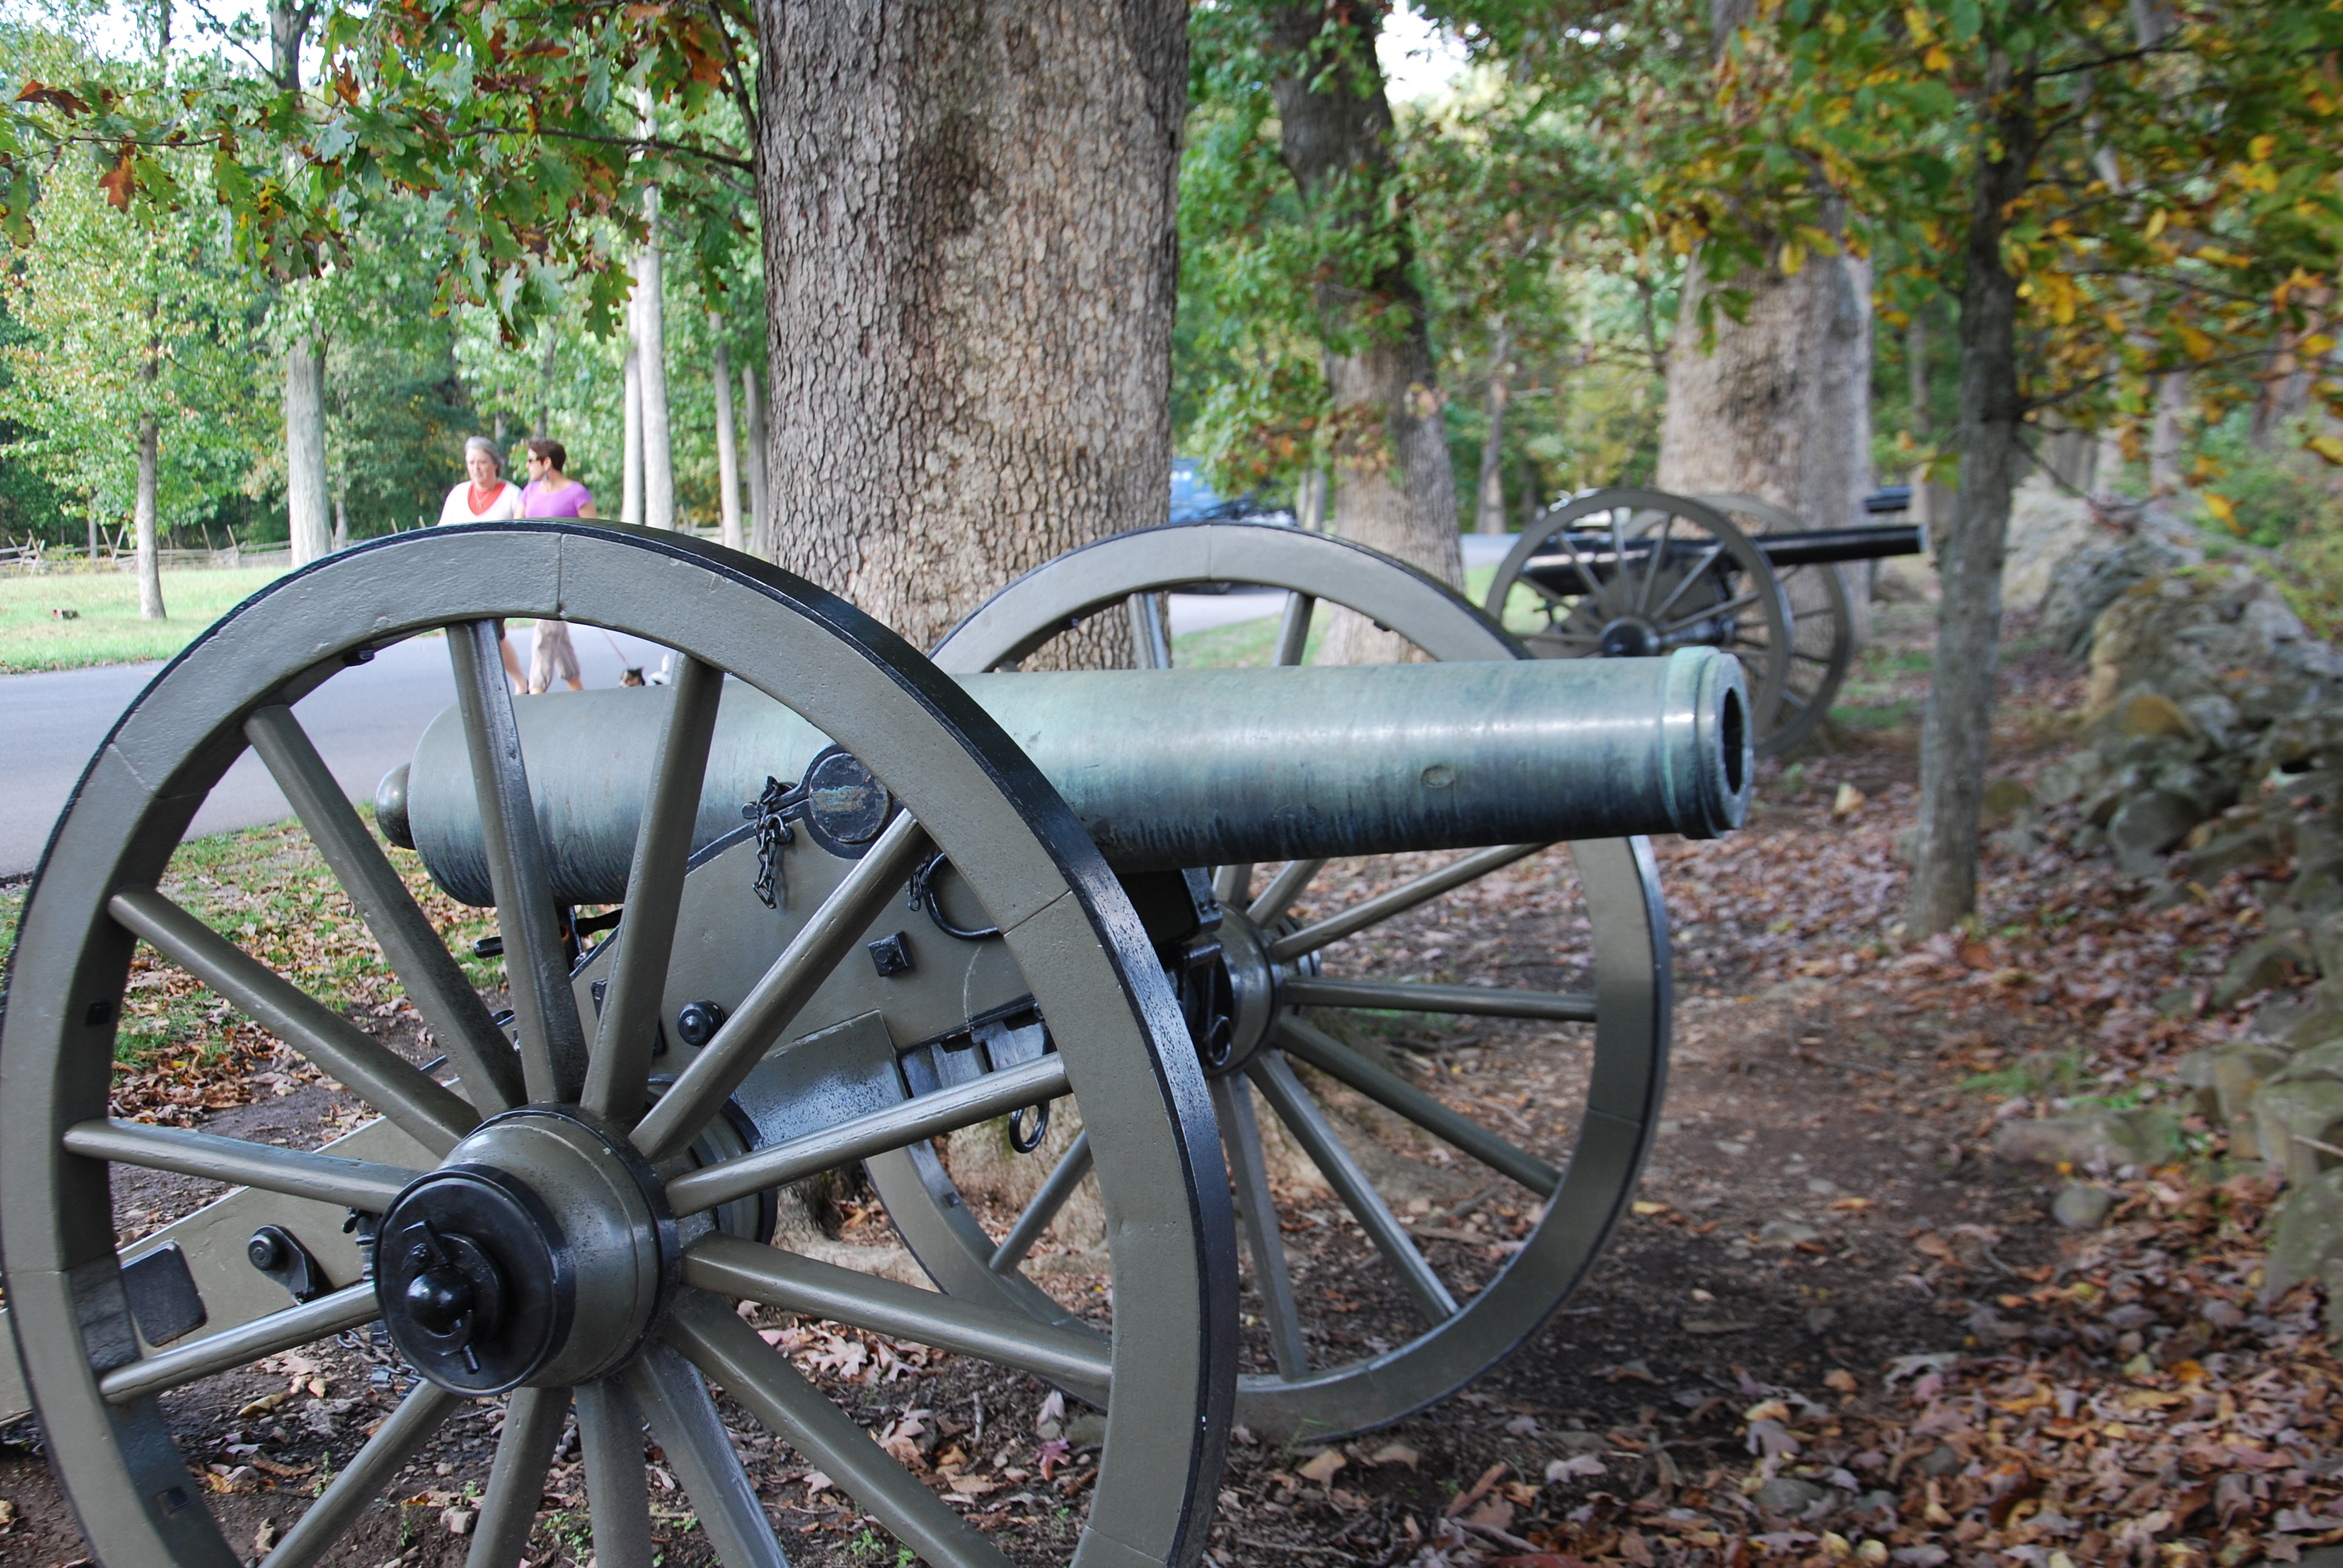 Confederate Cannons, Yankee Church-Bells | The Blog of Gettysburg ...